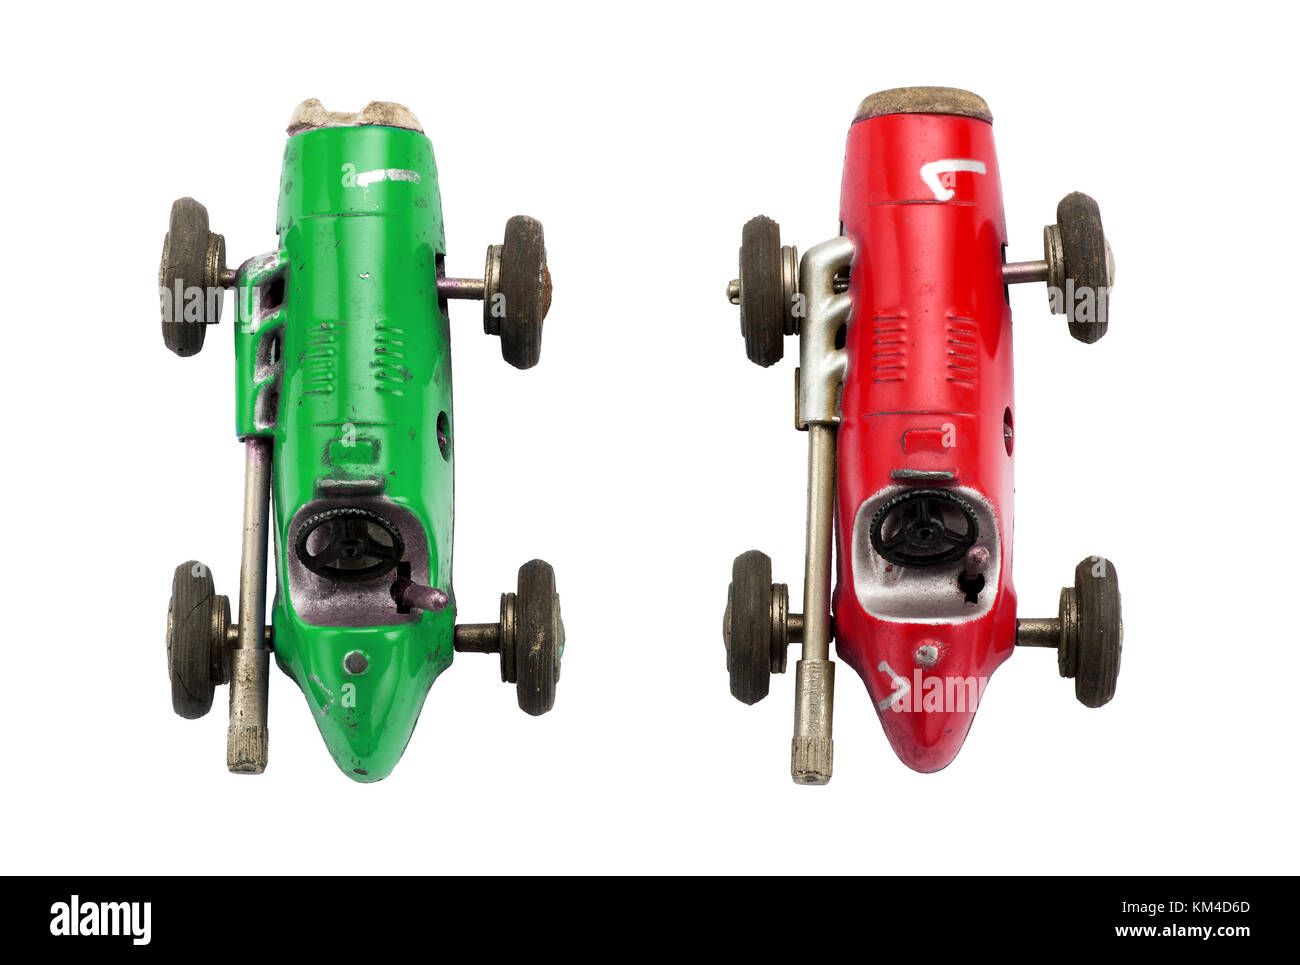 Two retro racing cars toys of green and red colors with open cockpit and big exhaust pipes. Isolated on white background and viewed from above Stock Photo